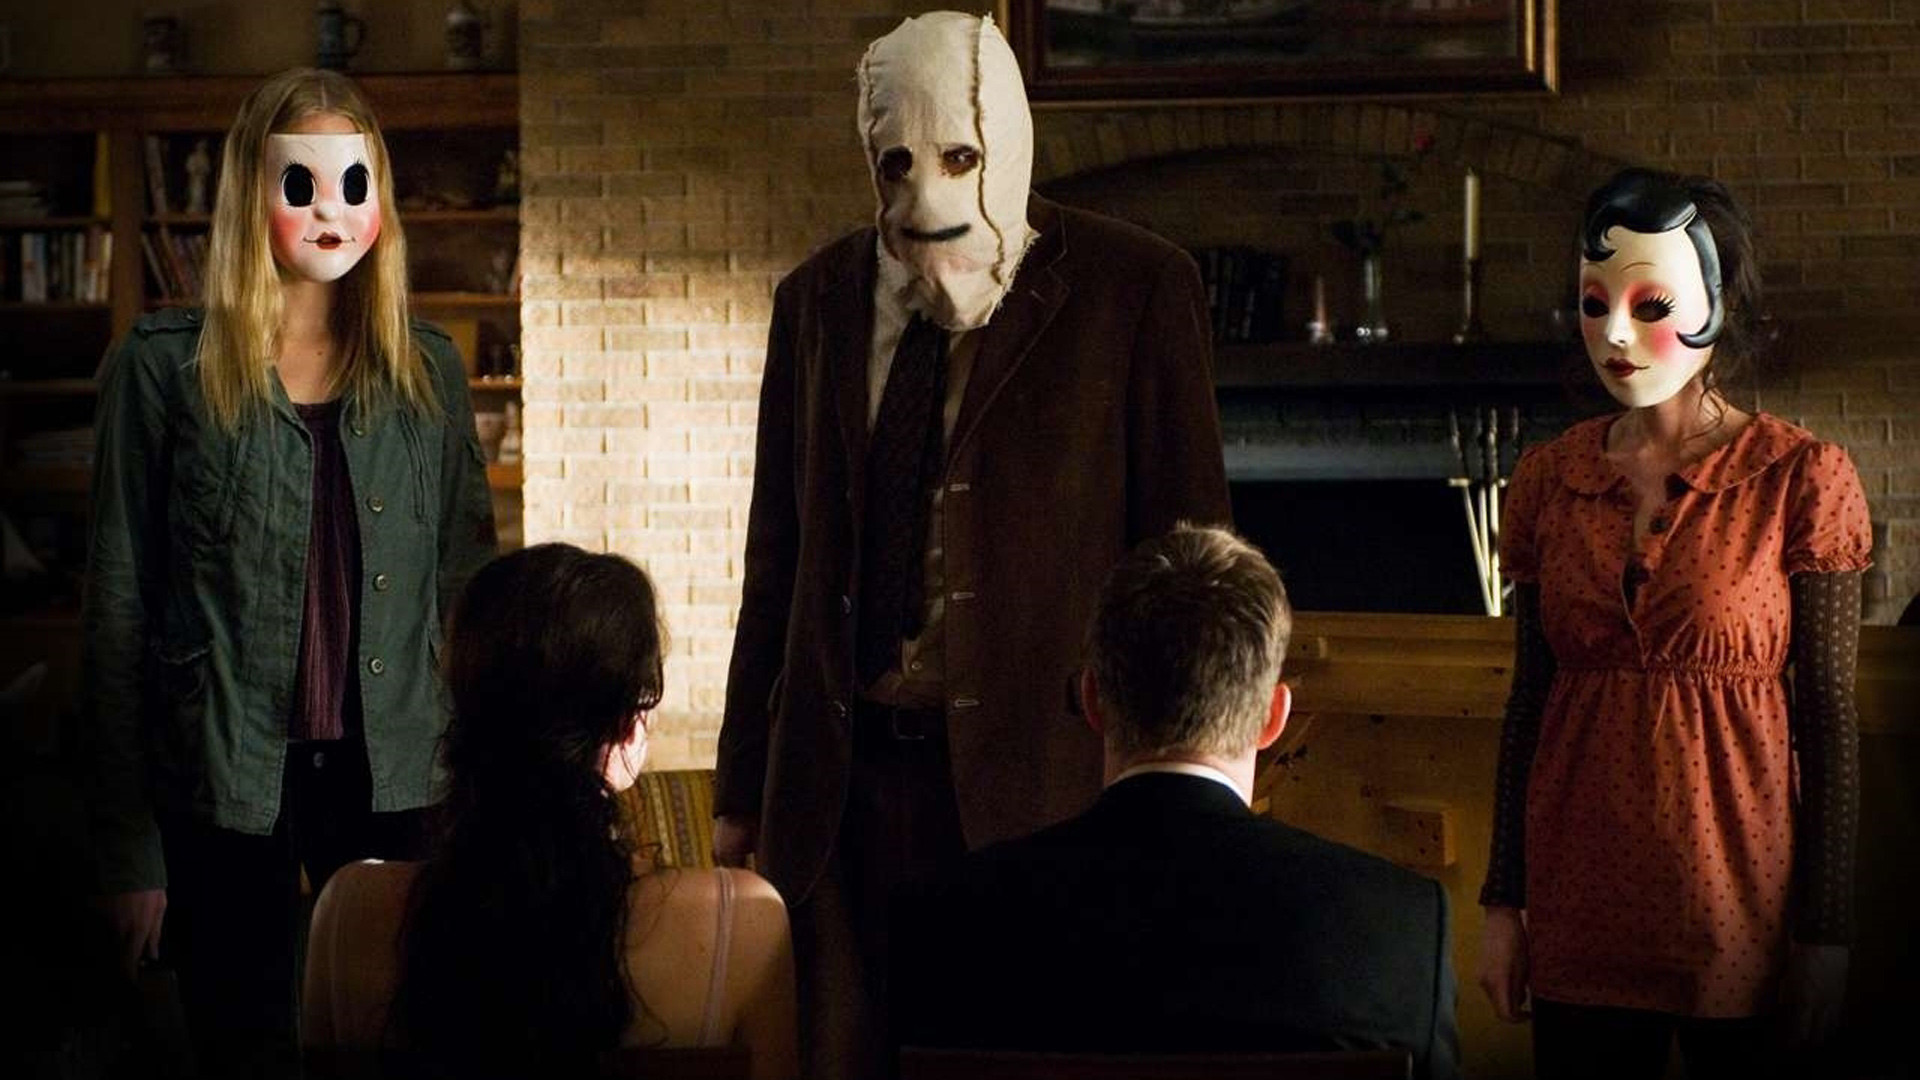 The First Clip From THE STRANGERS: CHAPTER 1 Is Knocking At The Door